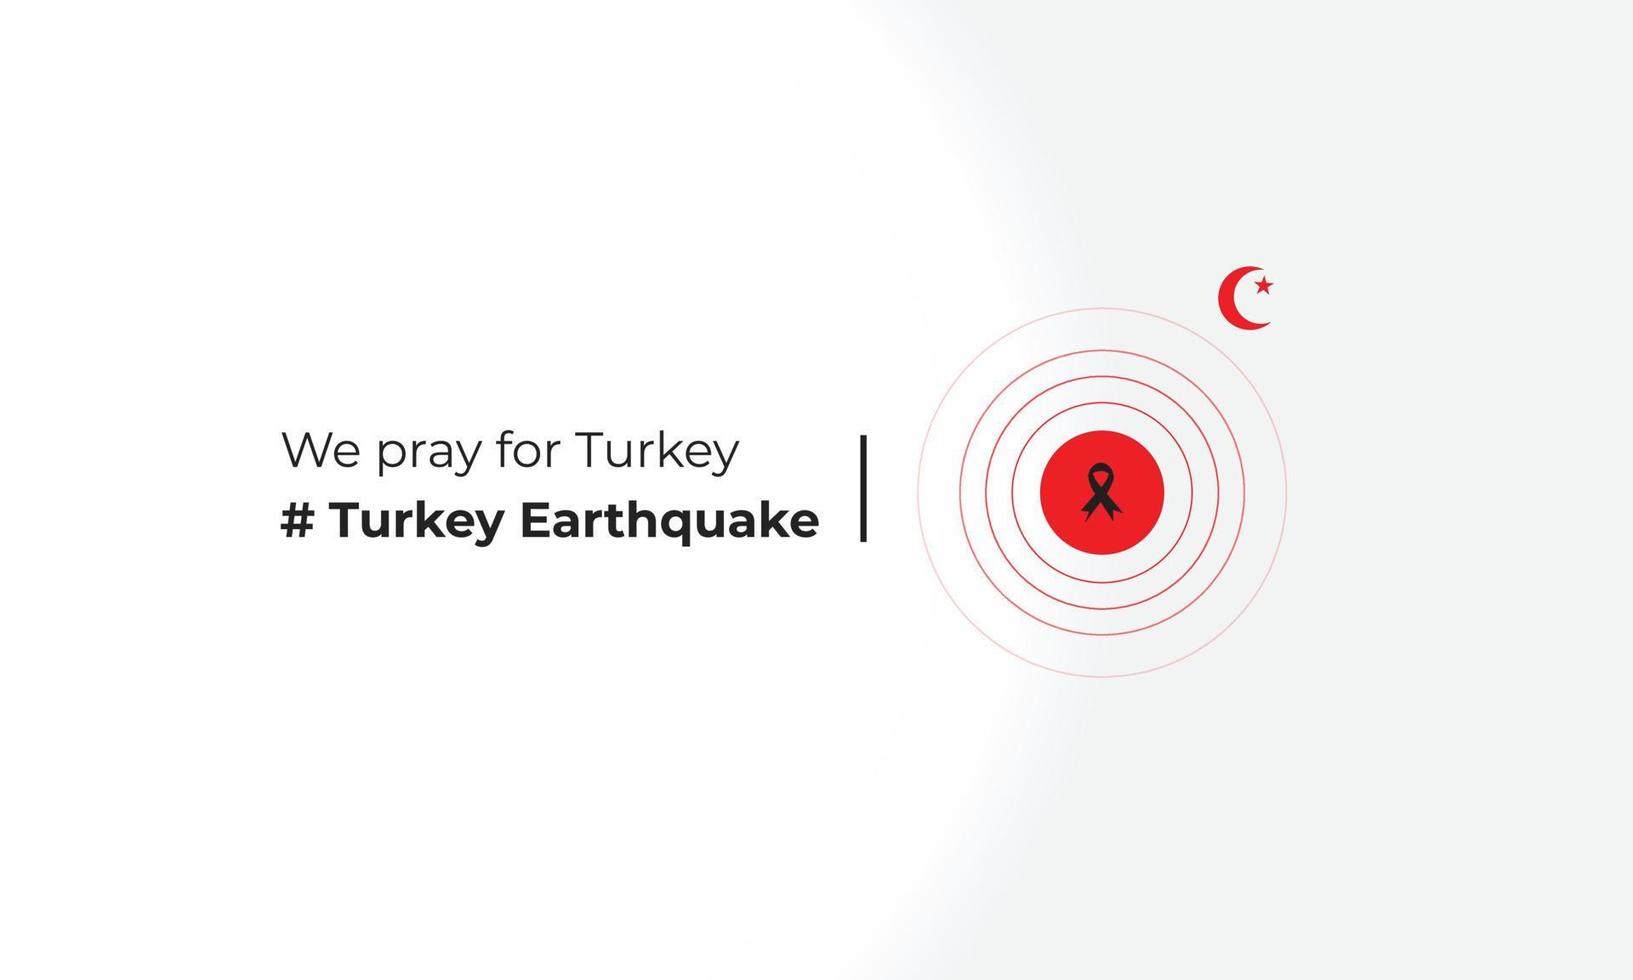 pray for turkey earthquake turkey national flag and map illustration Earthquake tragedy in Turkey background. Turkey earthquake disaster February 5, 2023 vector